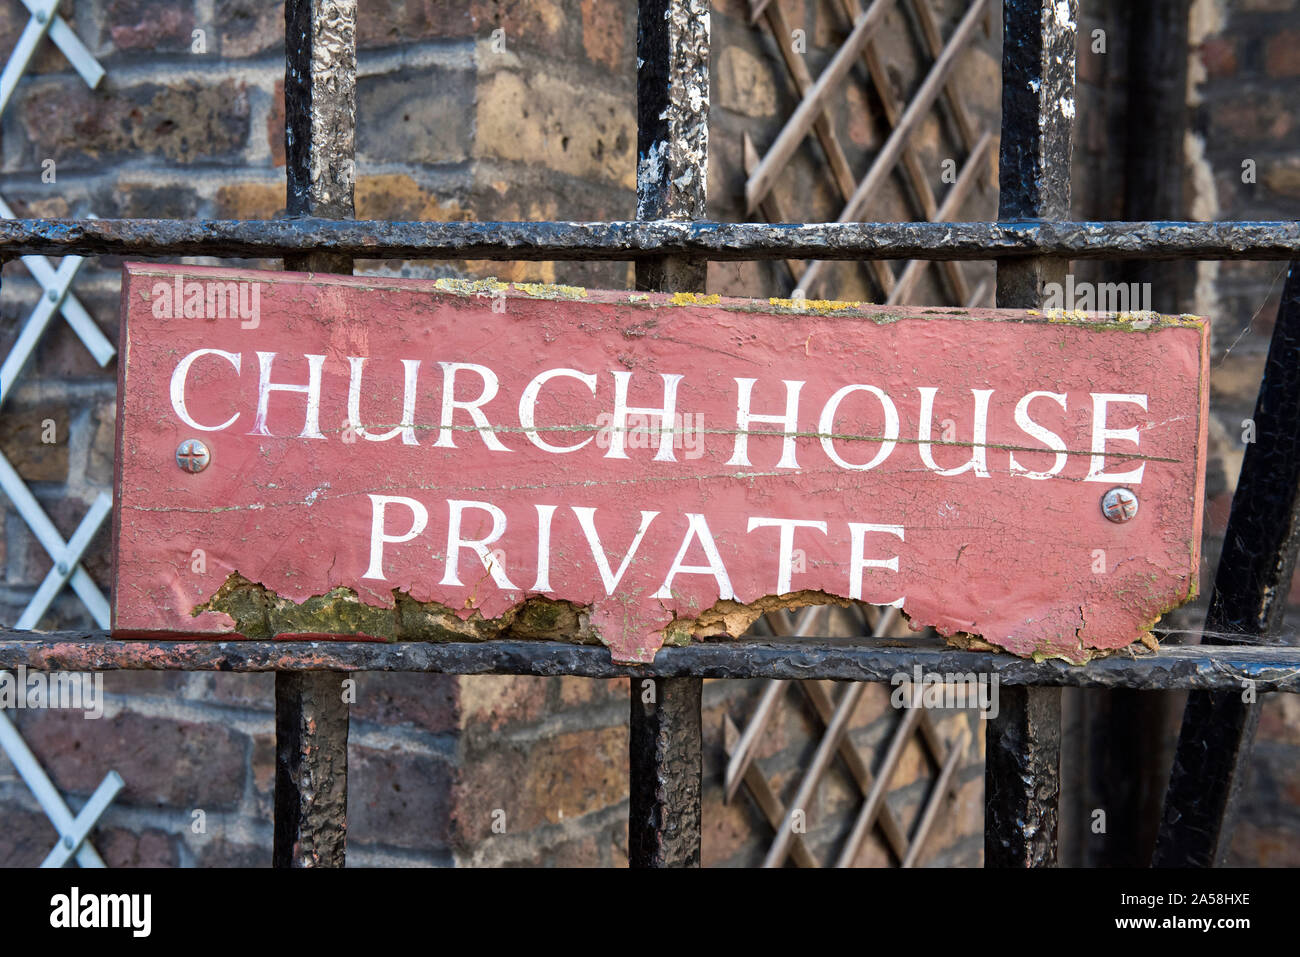 Church House Private sign on gate, St Bartholomew the Great, City of London Stock Photo